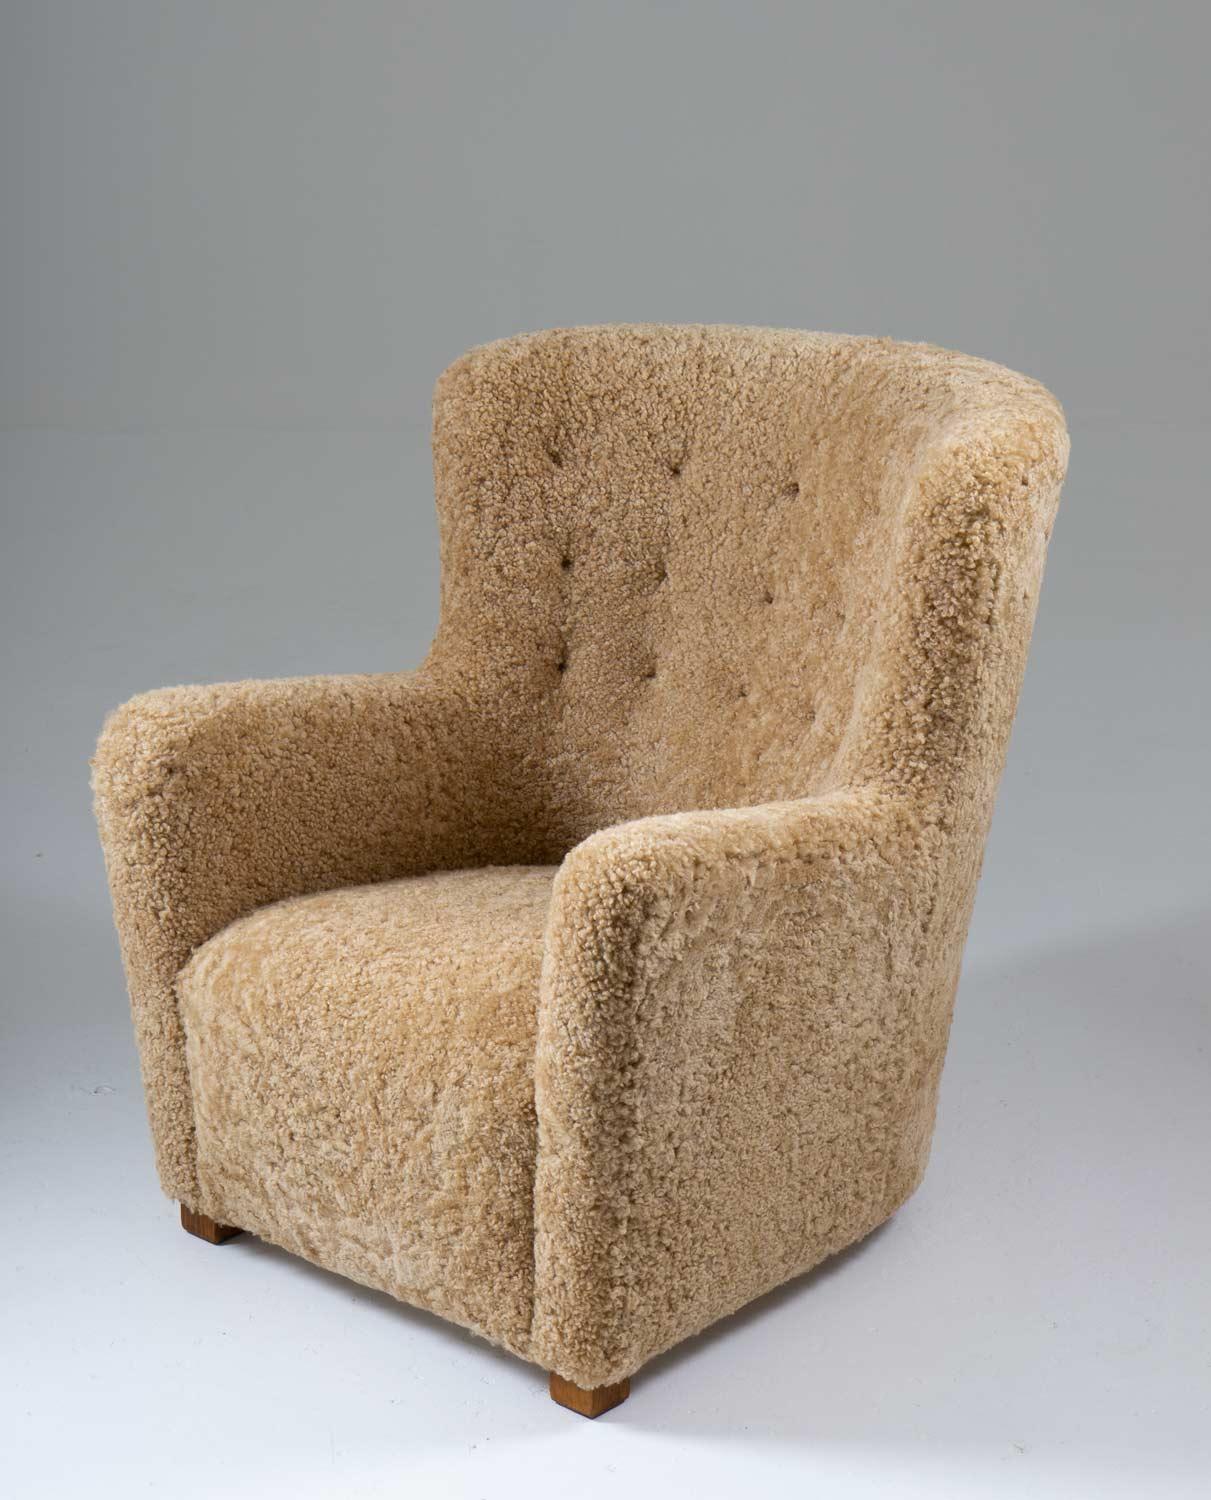 High-back lounge chair manufactured in Denmark ca 1940. 
This majestic chair surrounds you with its curved backrest and it is just as comfortable as it looks. 
It's been reupholstered in honey colored sheepskin and cognac leather